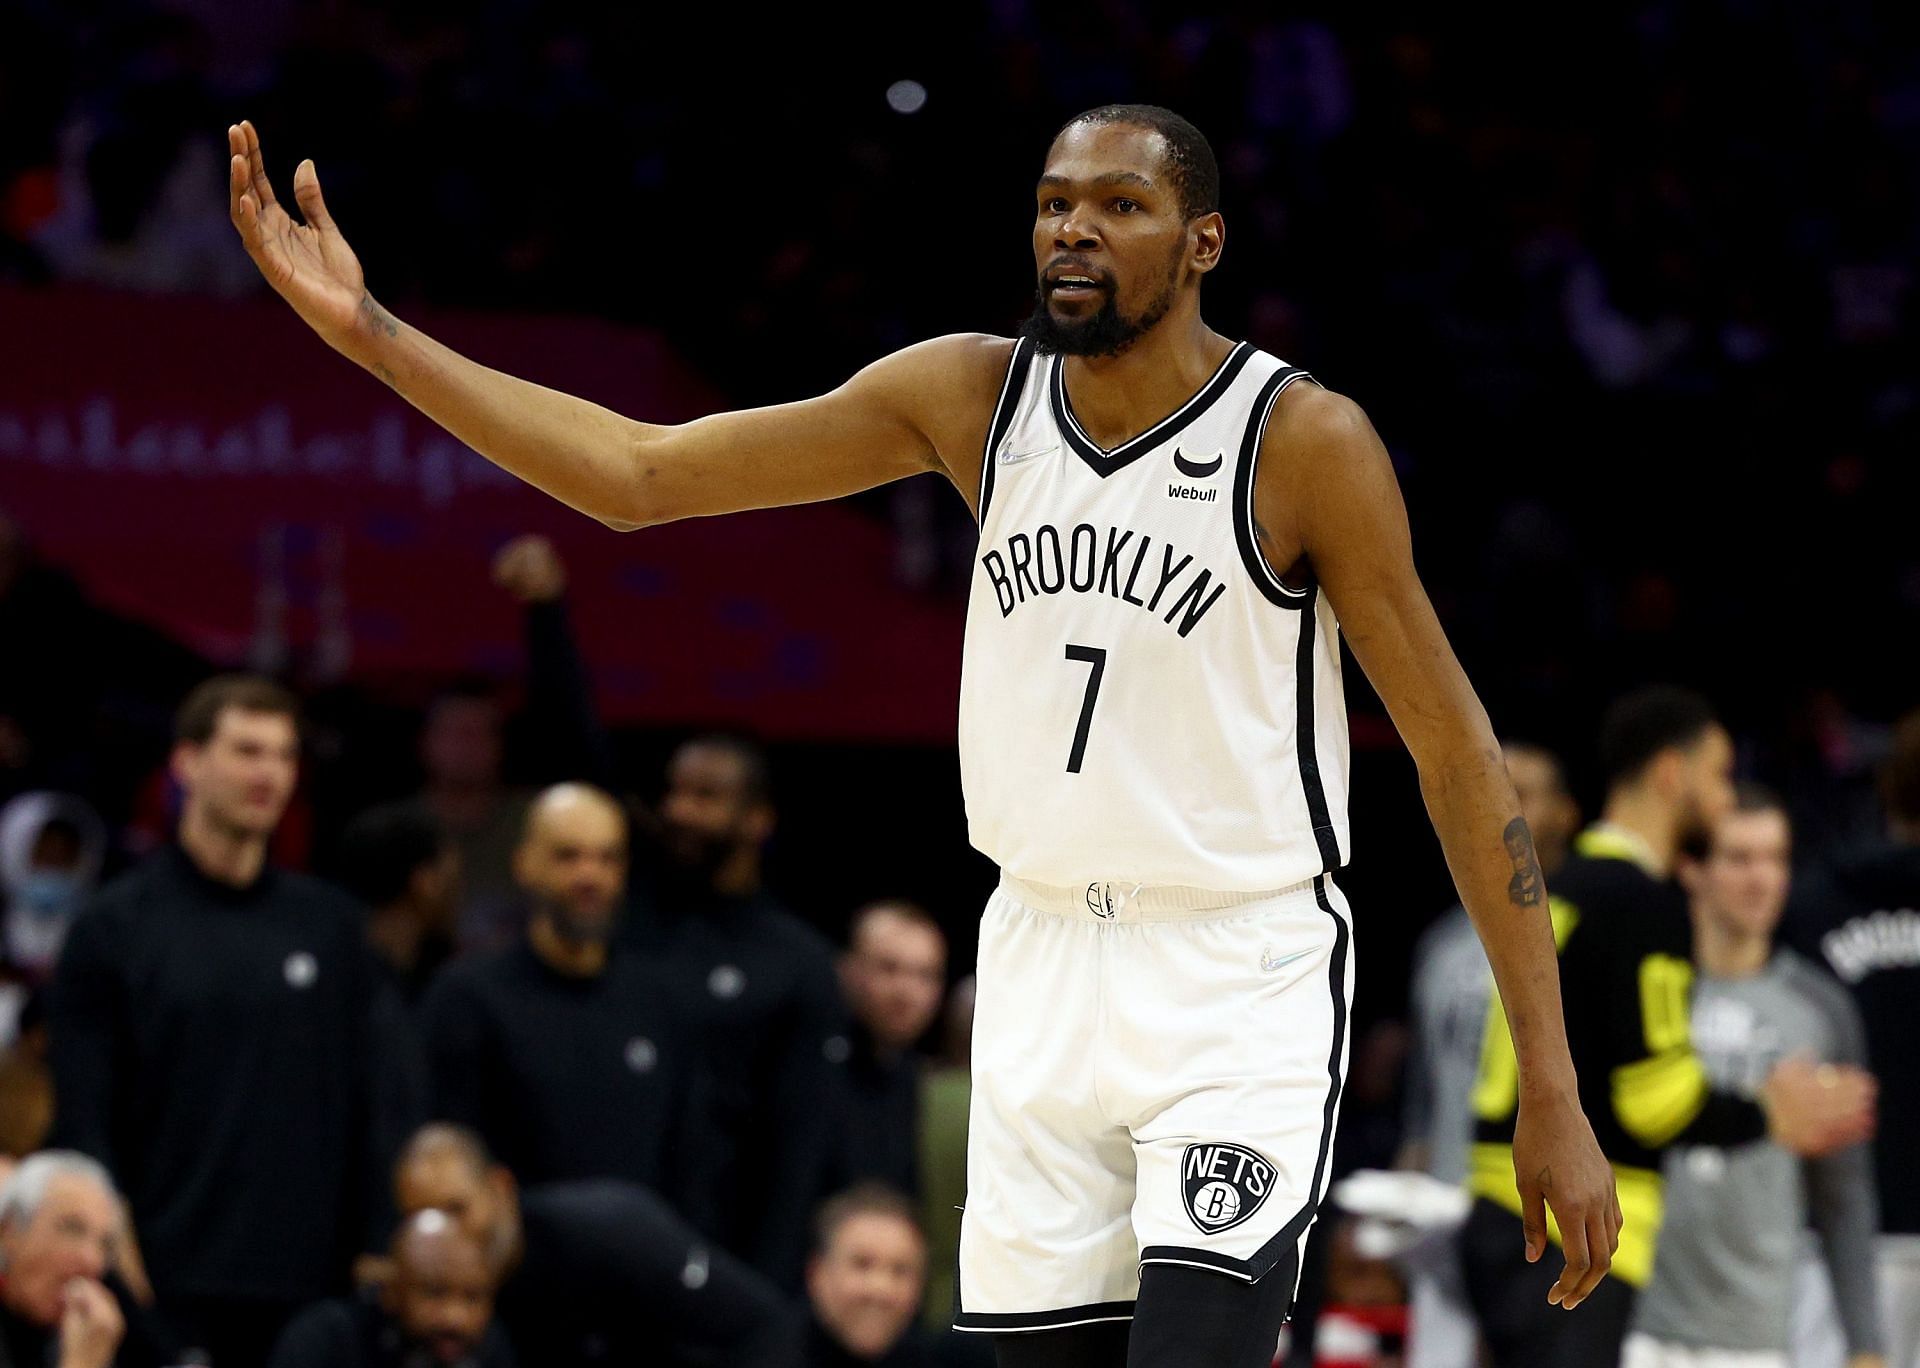 Kevin Durant put up 25 points and 14 boards on Thursday as the Brooklyn Nets rolled to an easy victory vs the Philadelphia 76ers